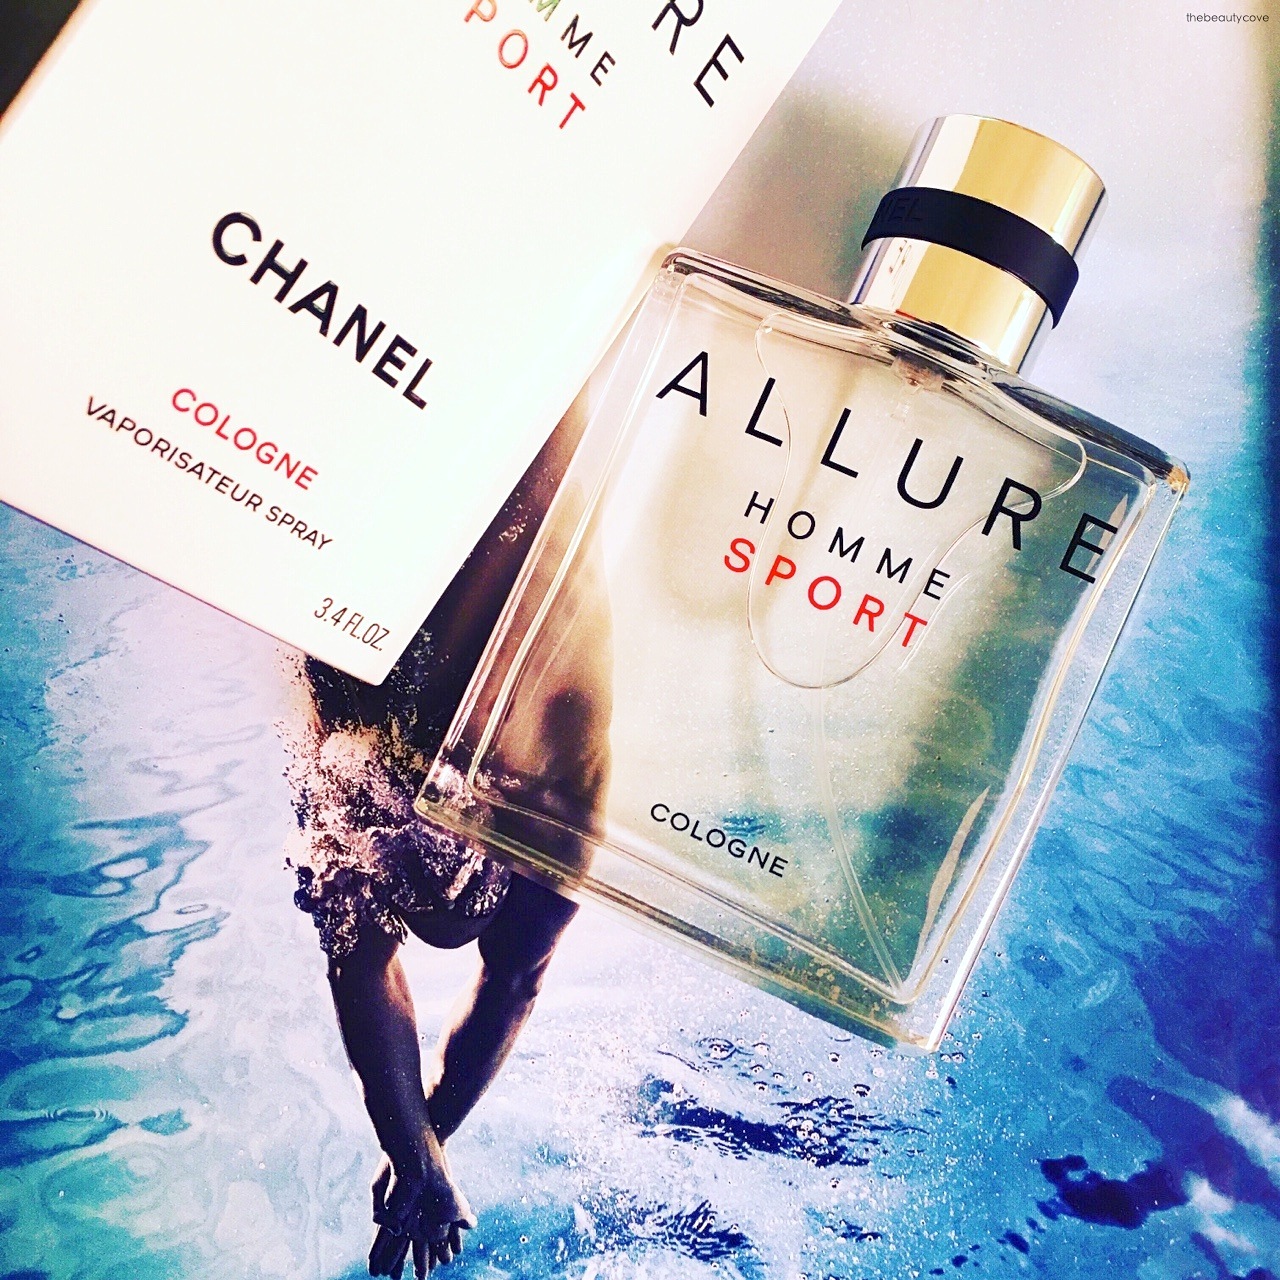 Allure homme cologne. Chanel homme Sport Cologne. Chanel Allure homme Sport Cologne. Одеколон Allure homme Sport. Chanel Allure Sport Cologne.